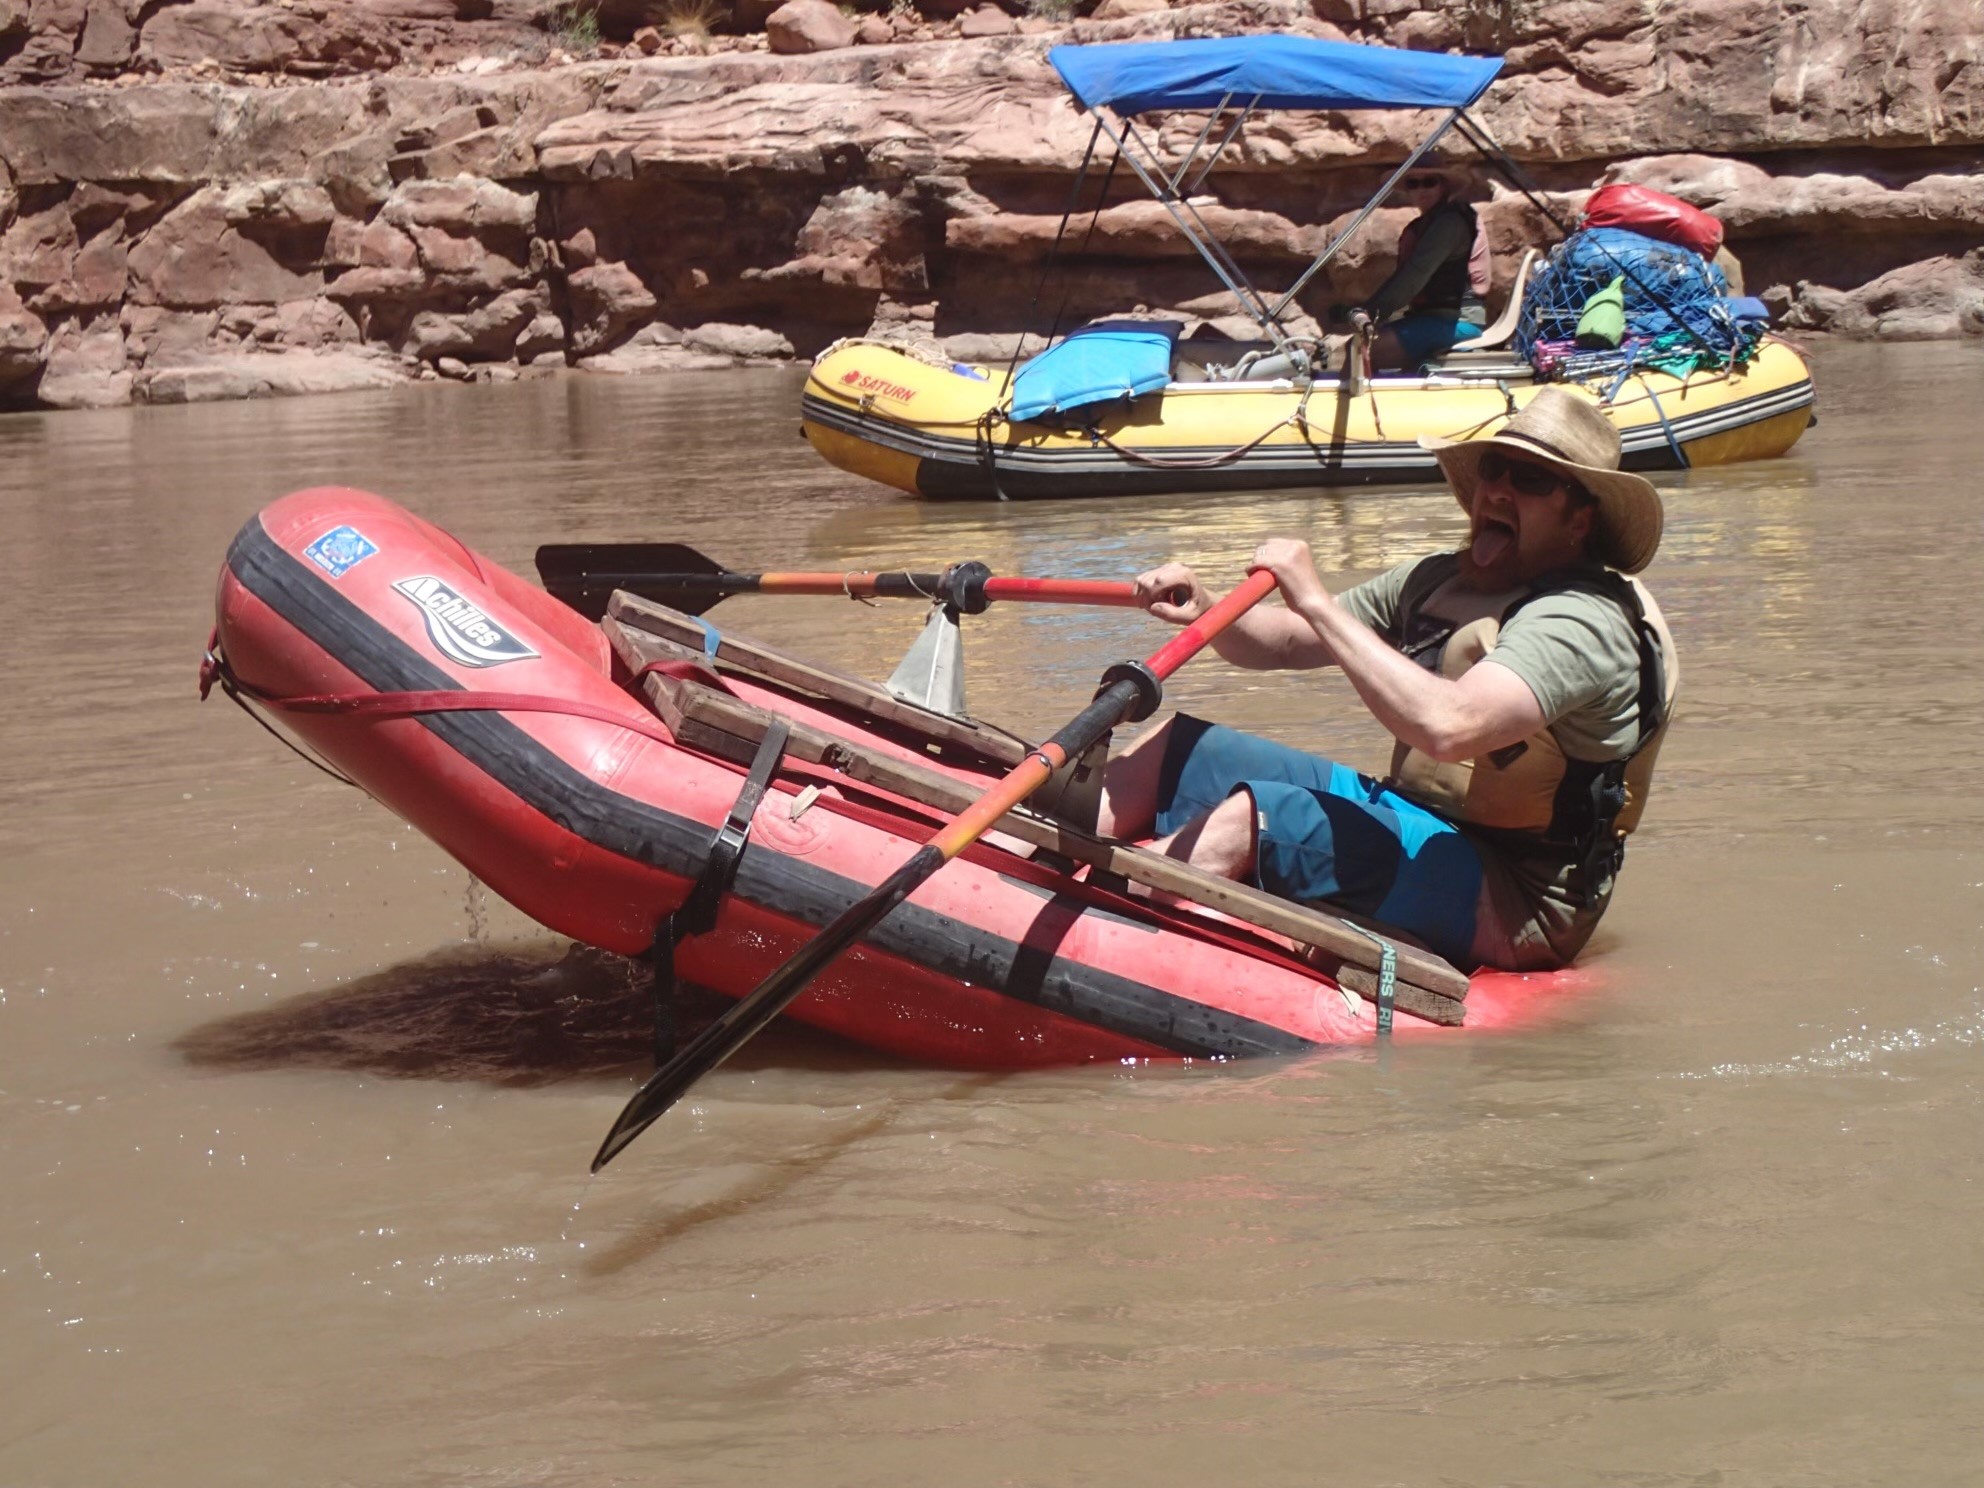 Mike Wight Rafting